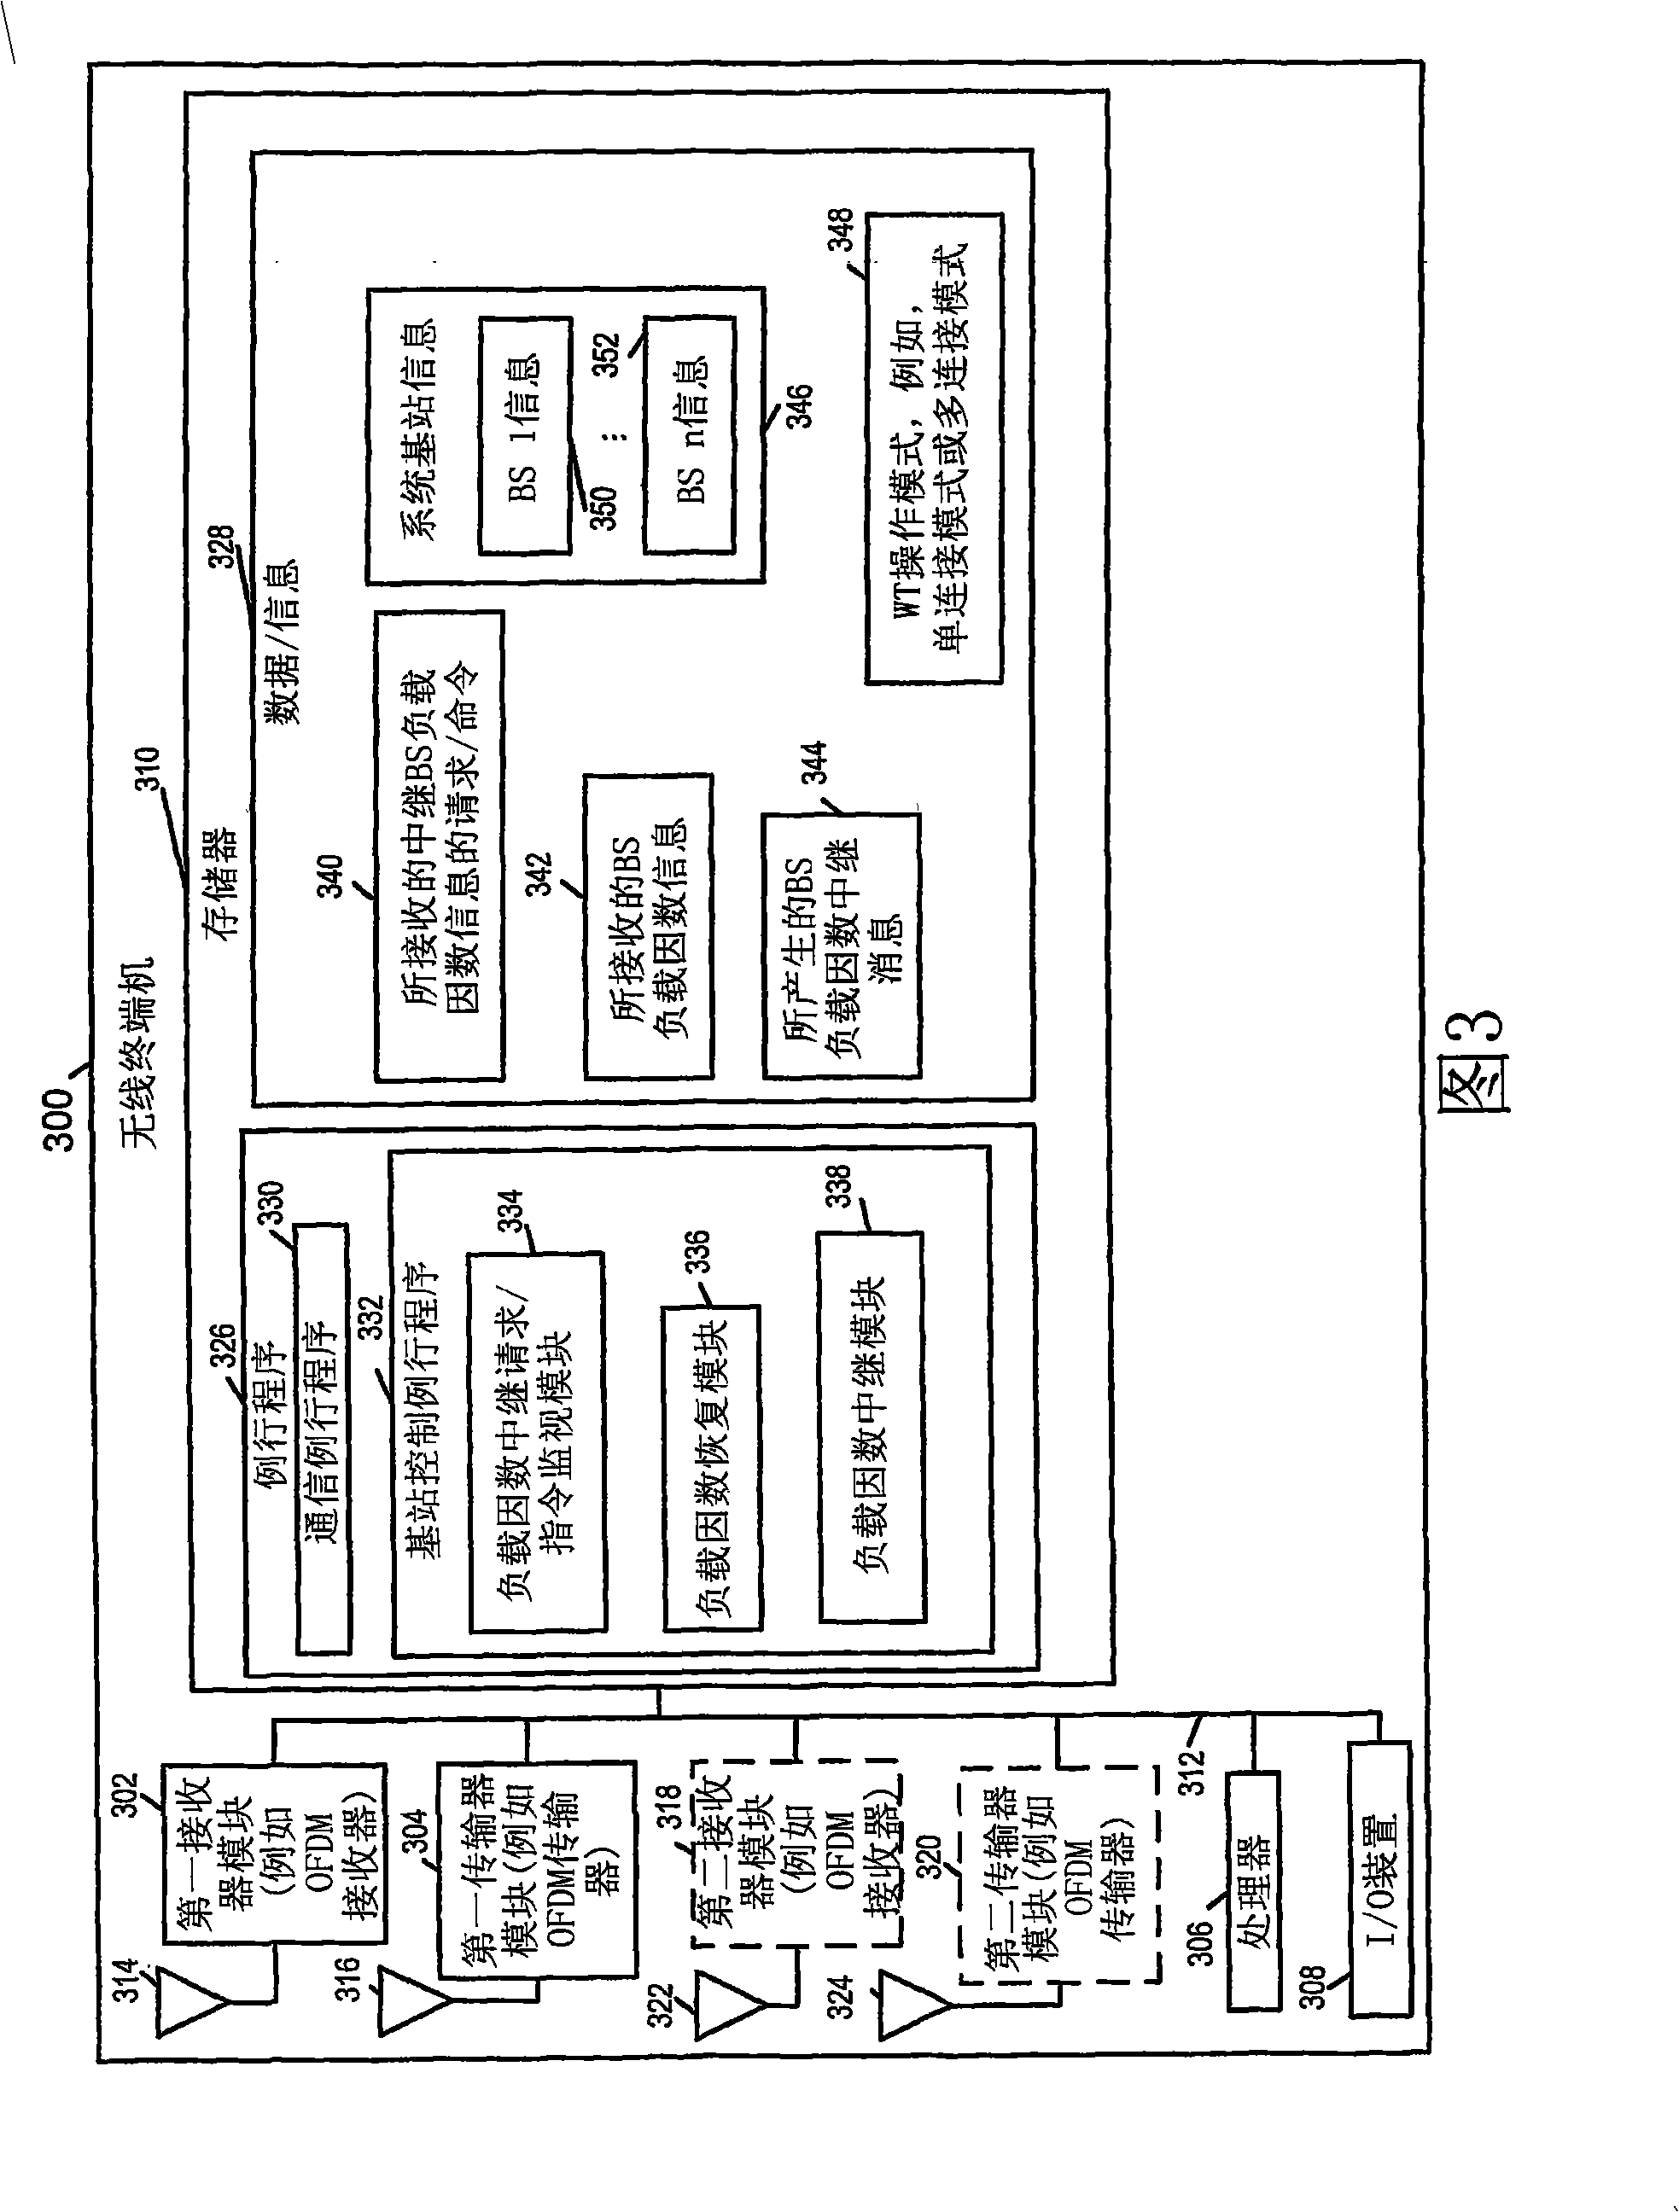 Methods and apparatus for controlling a base station's transmission power